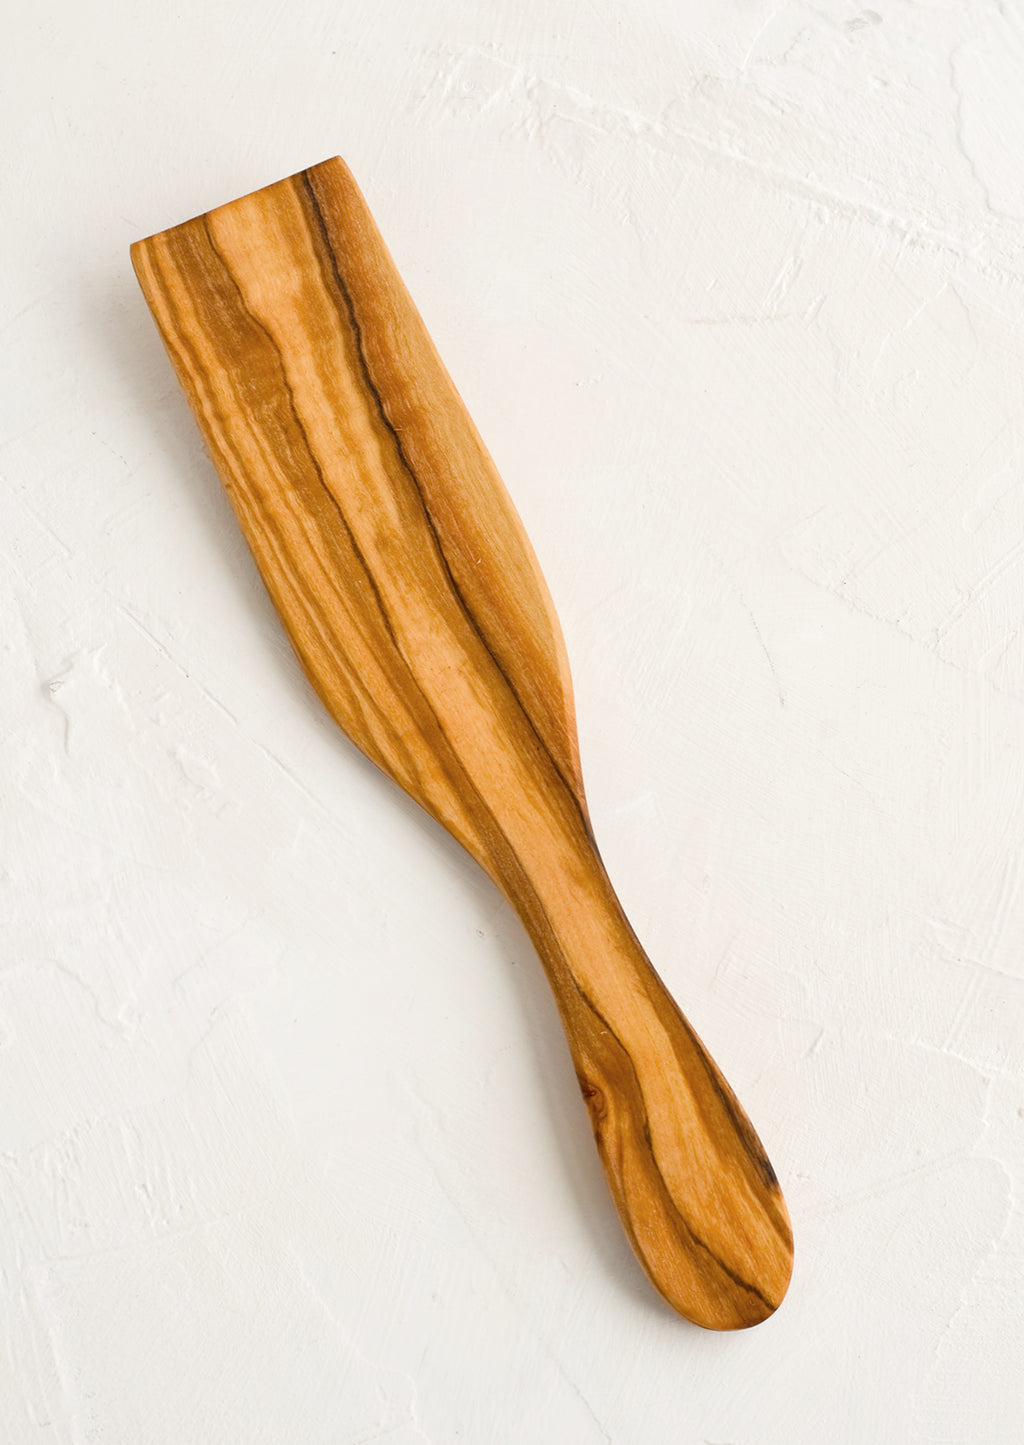 1: A wooden serving utensil in flat spatula shape meant for serving pastries.